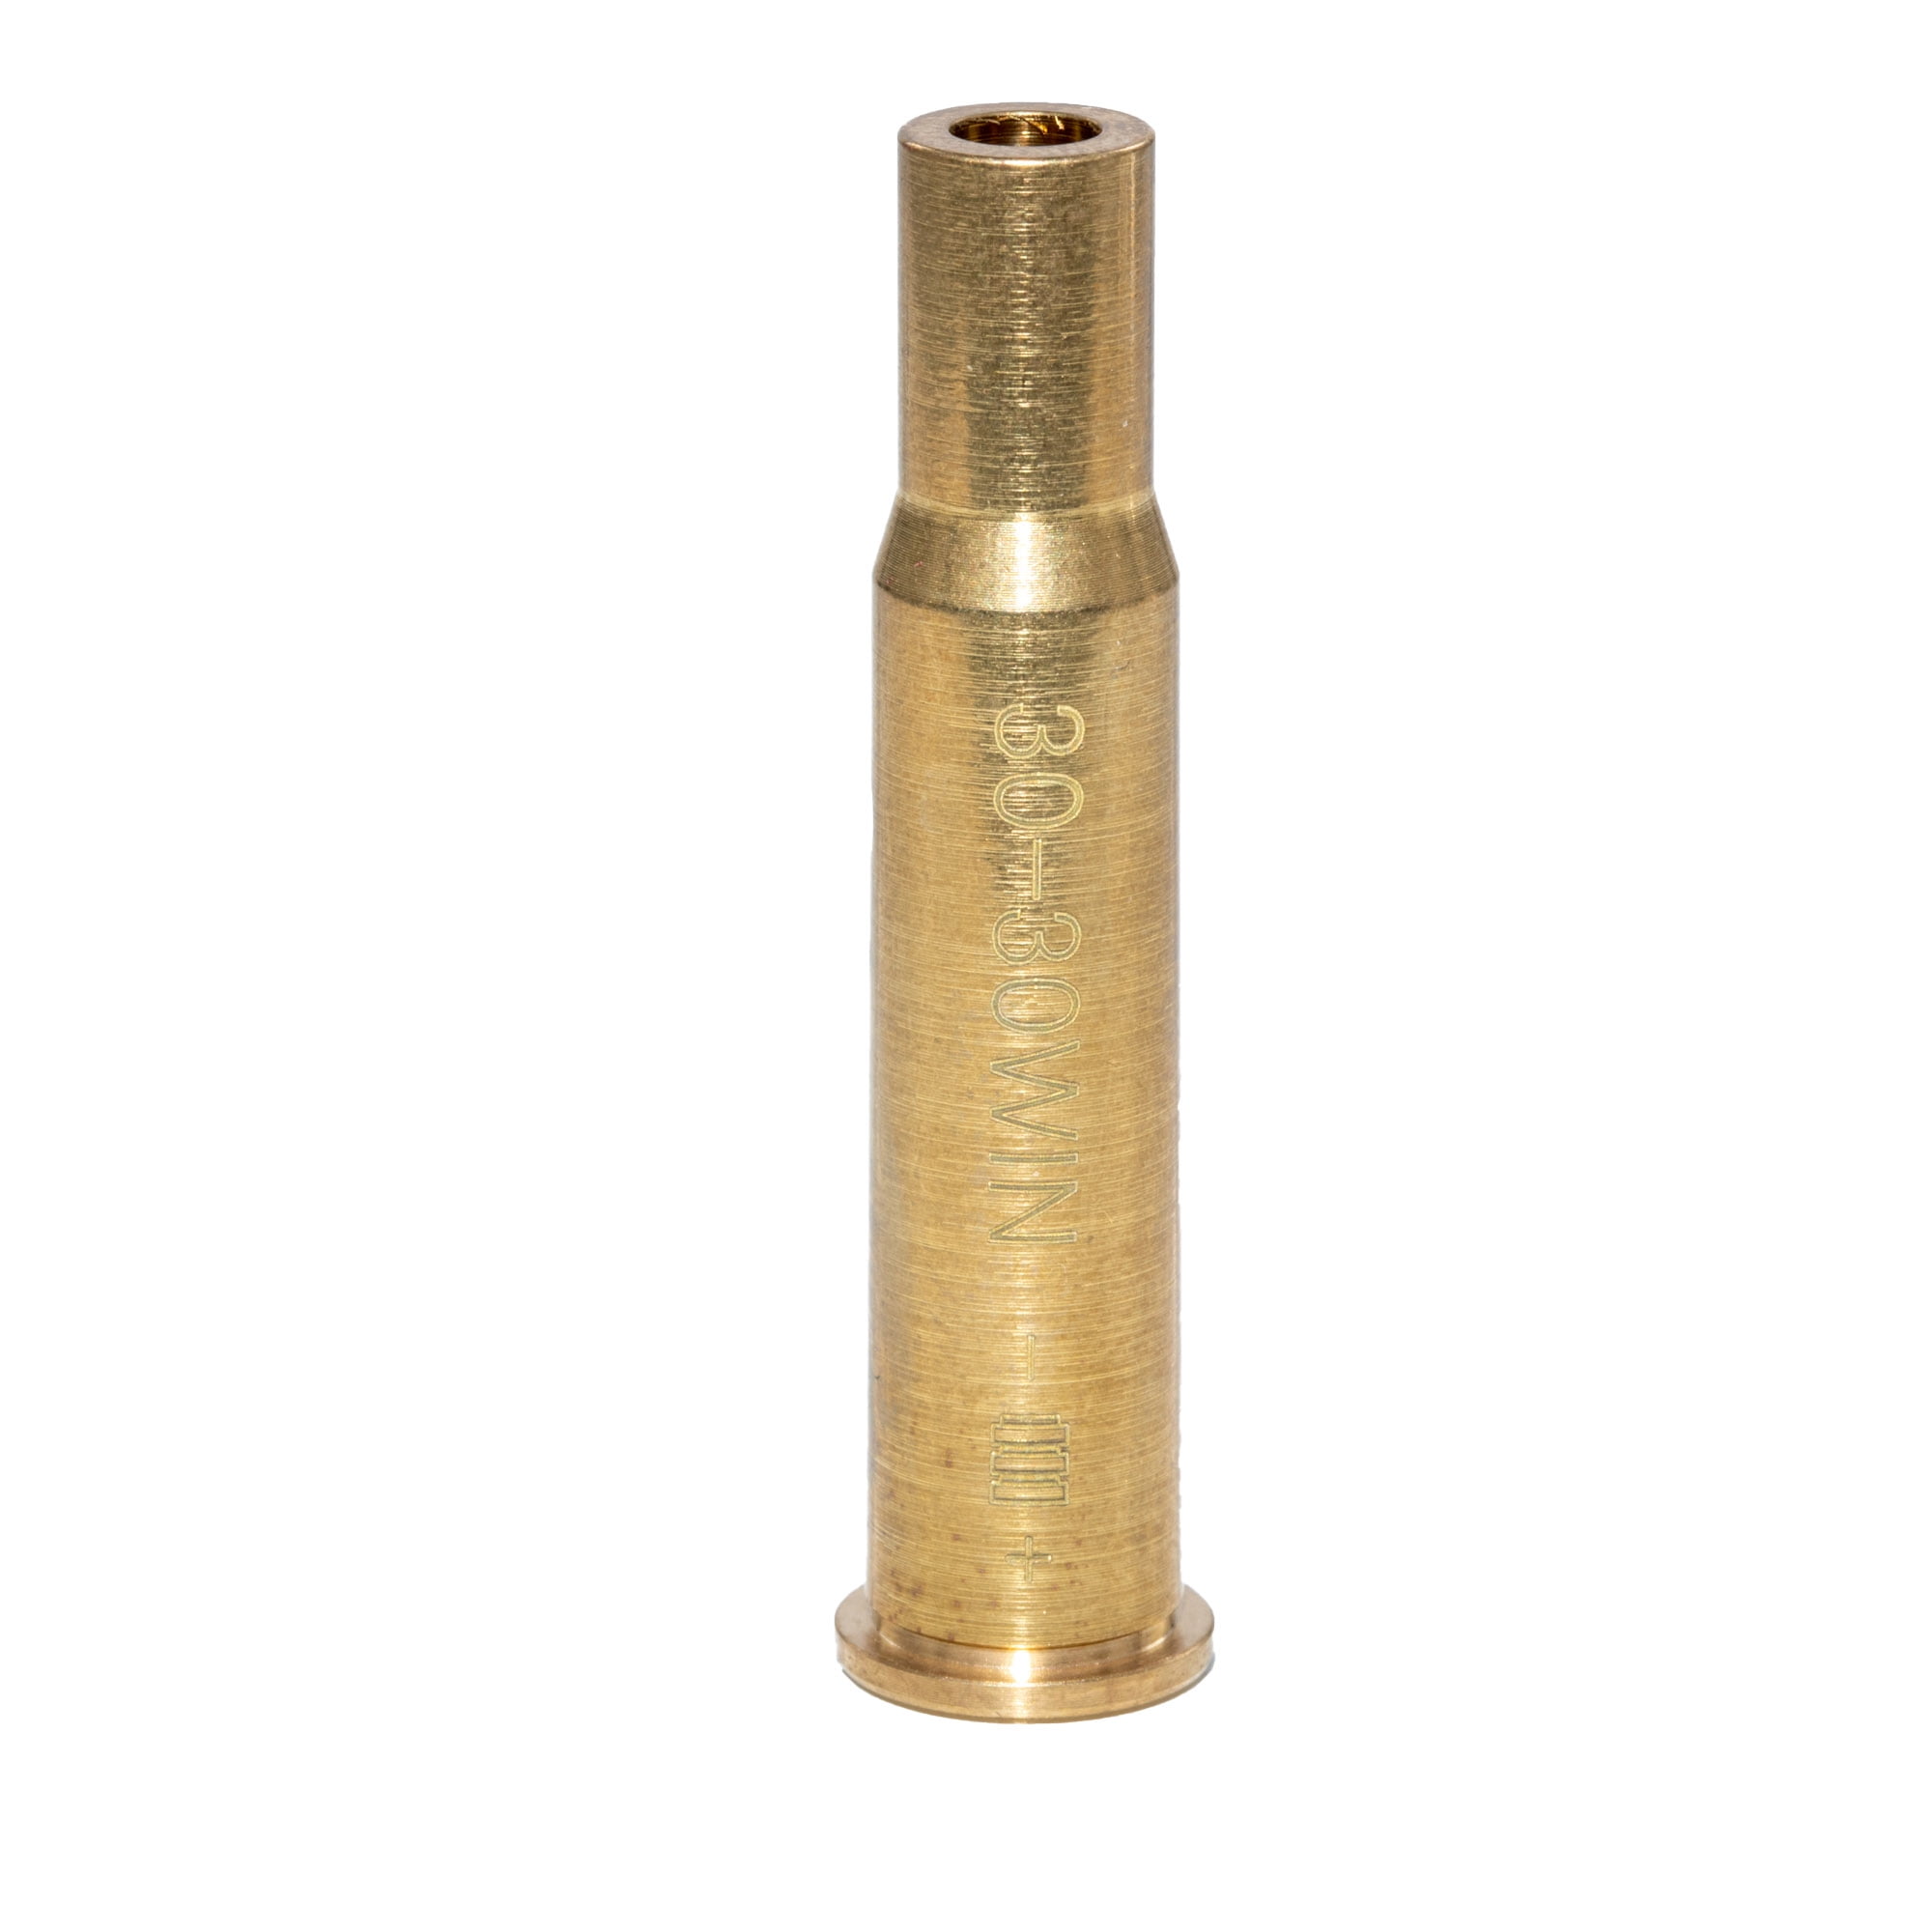 Details about   US Red Dot Laser Beam CAL 30-30WIN Cartridge Bore Sighter Boresighter W/ Battery 